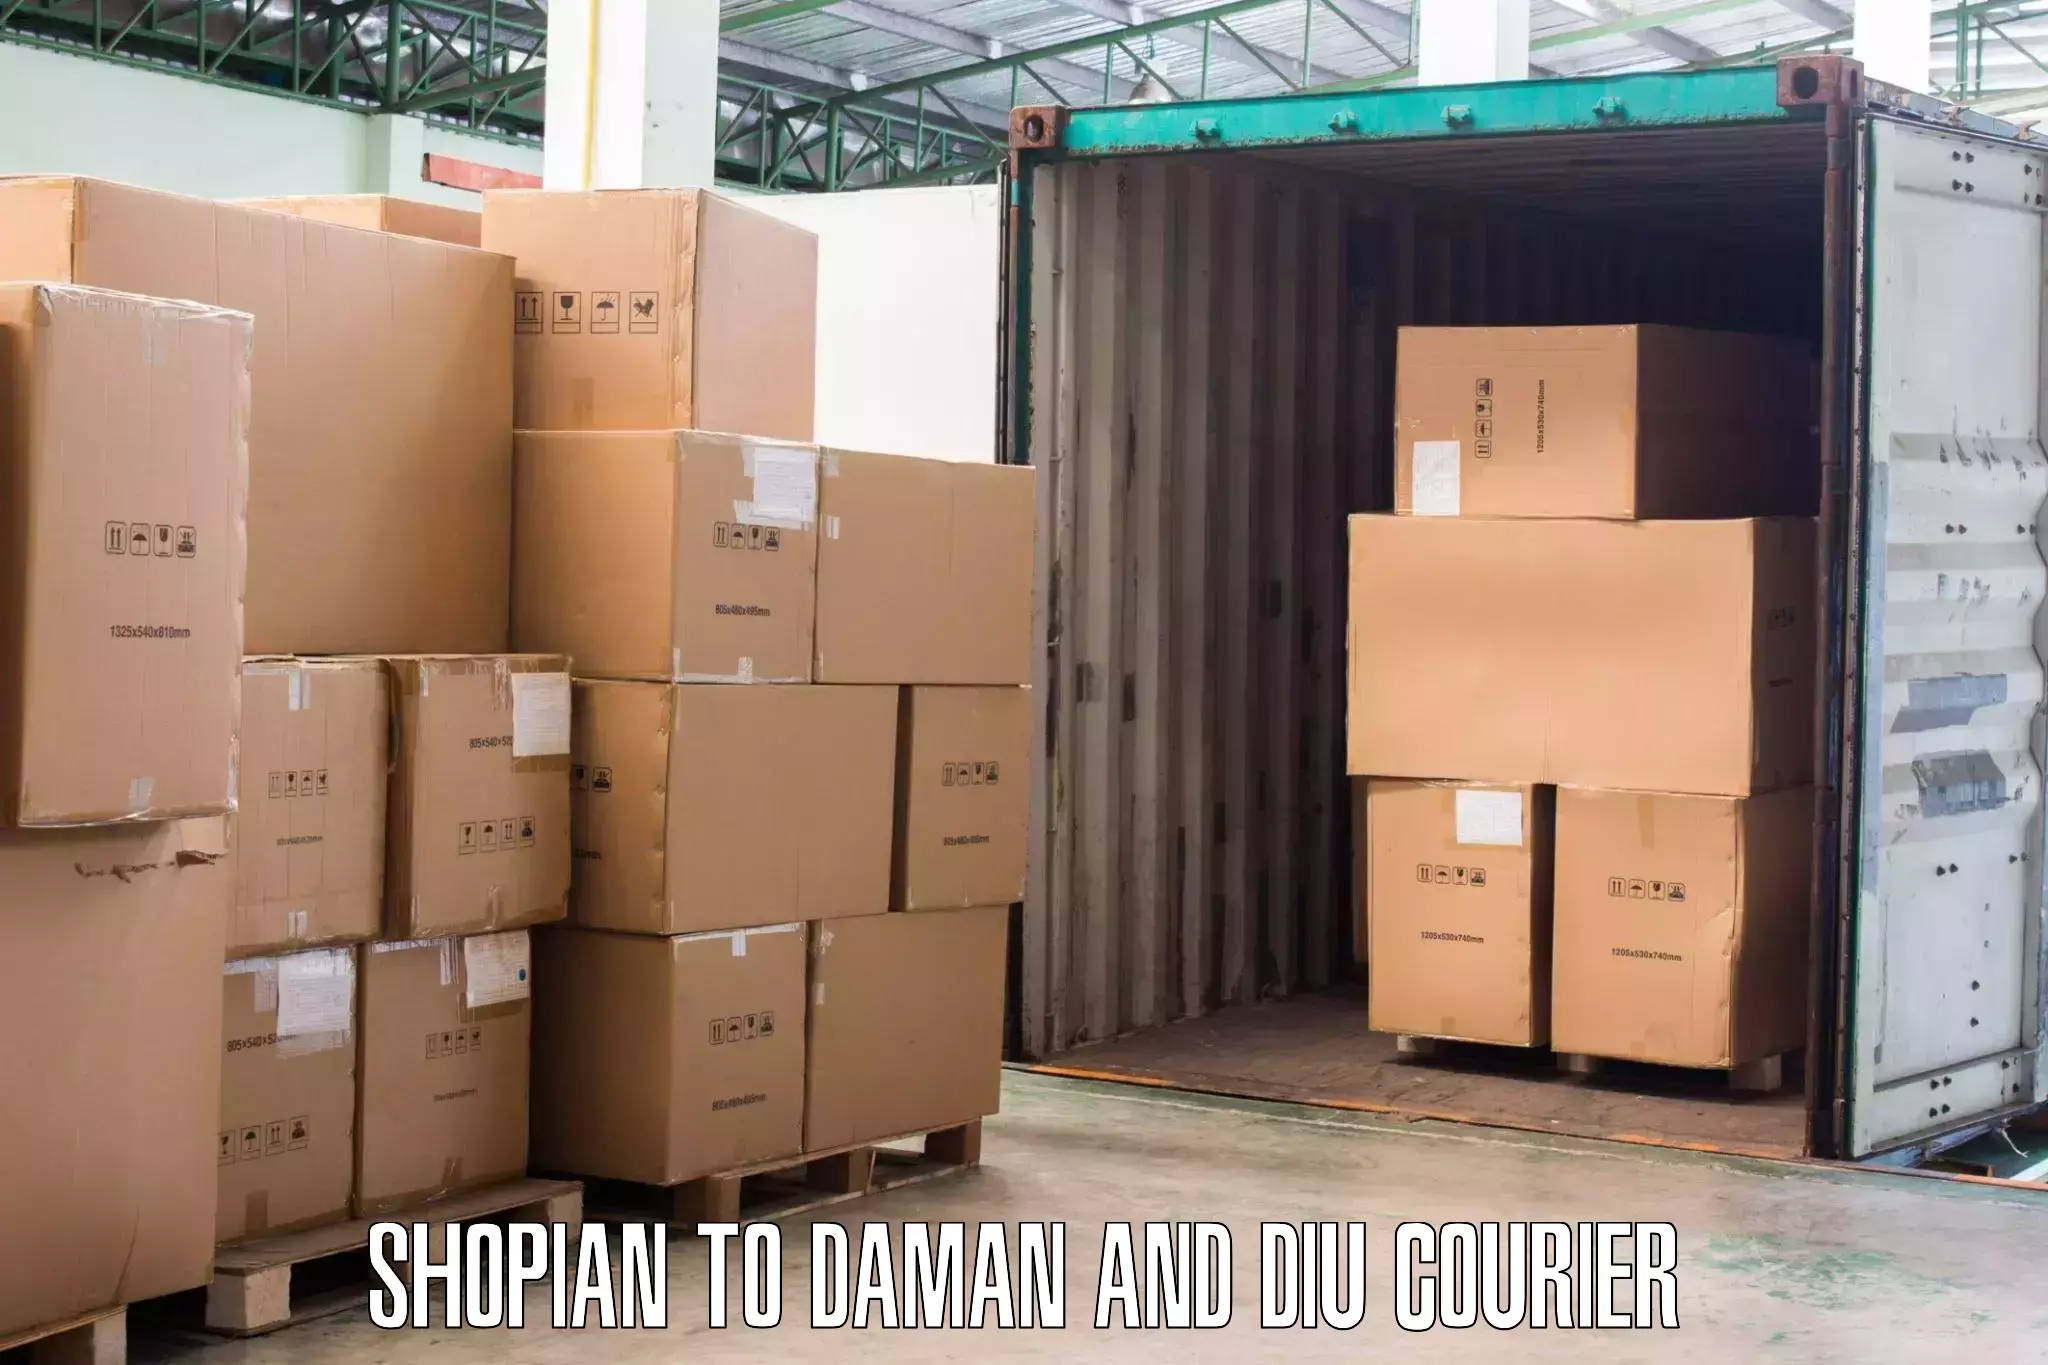 Smooth relocation services Shopian to Daman